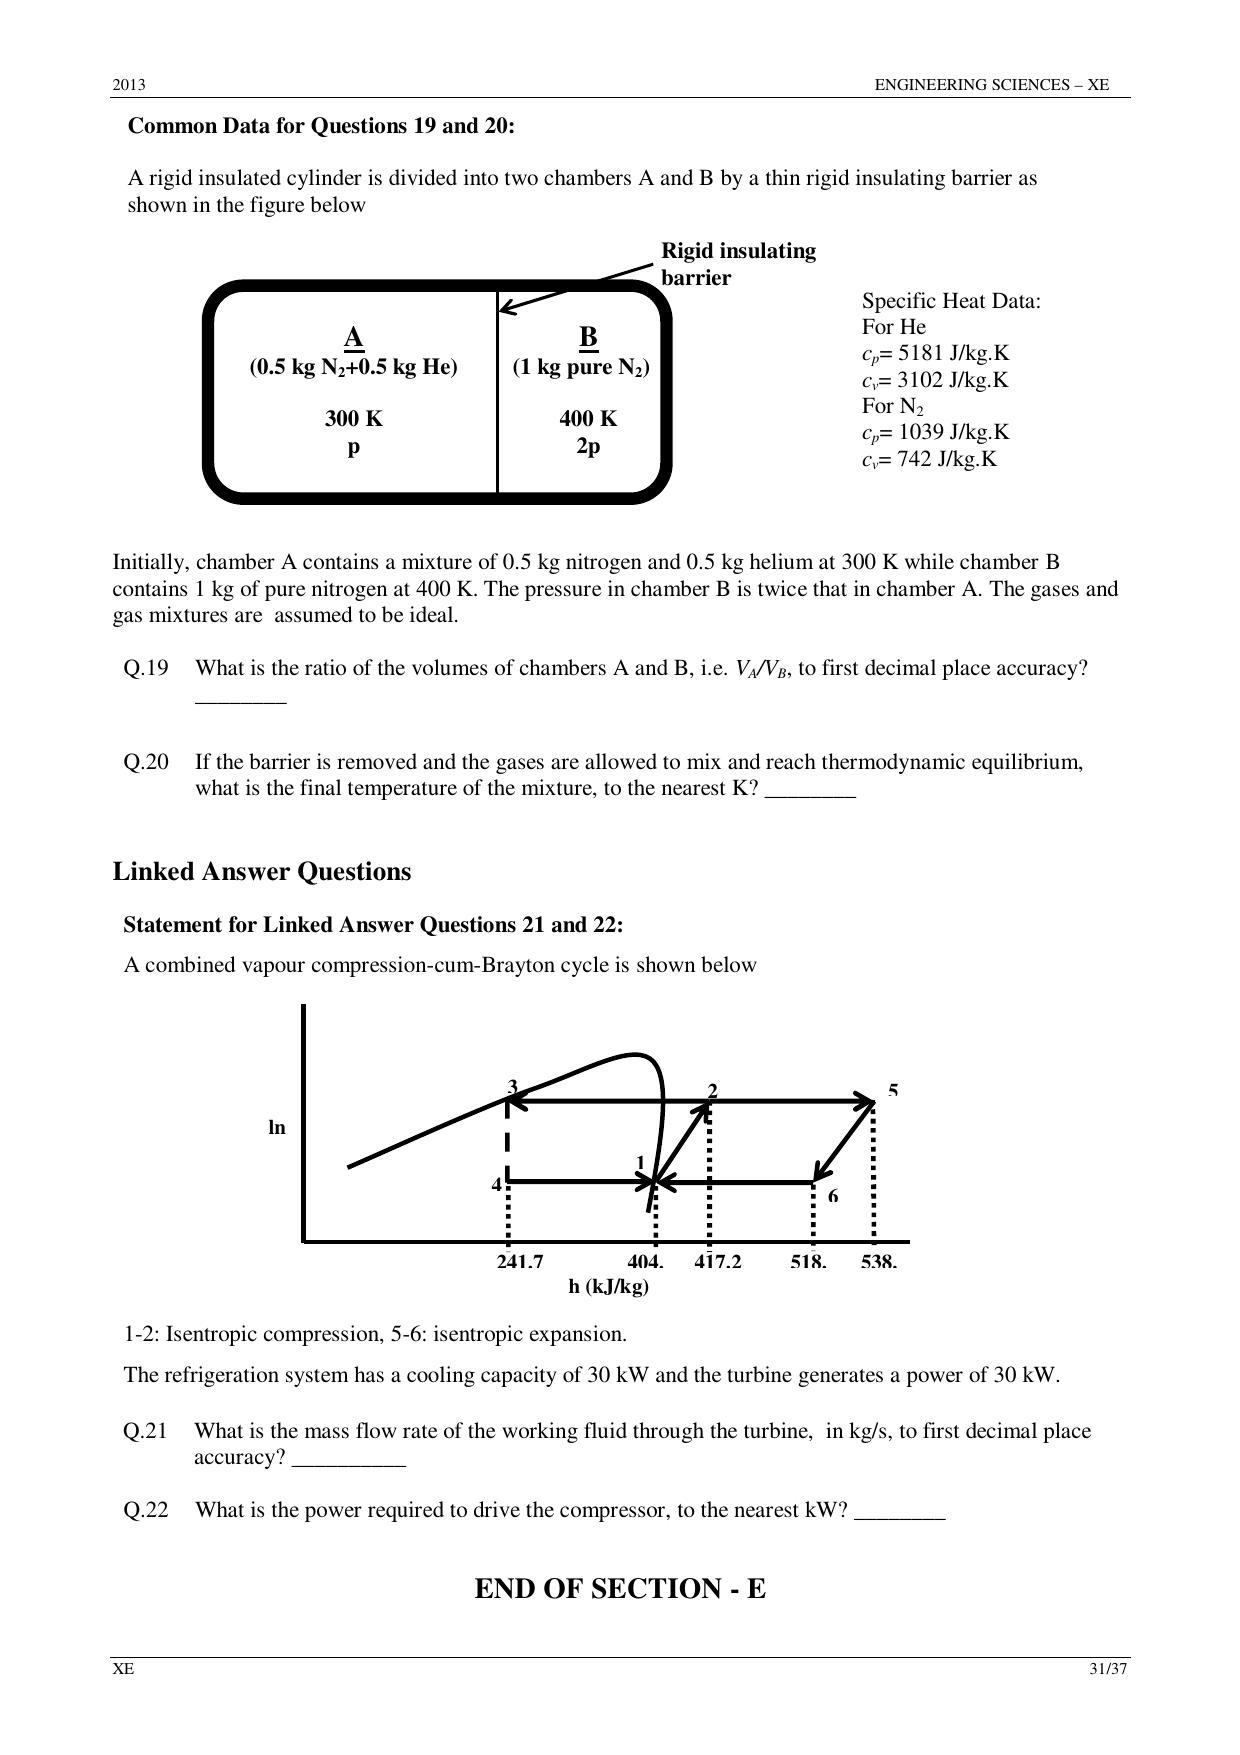 GATE 2013 Engineering Sciences (XE) Question Paper with Answer Key - Page 31